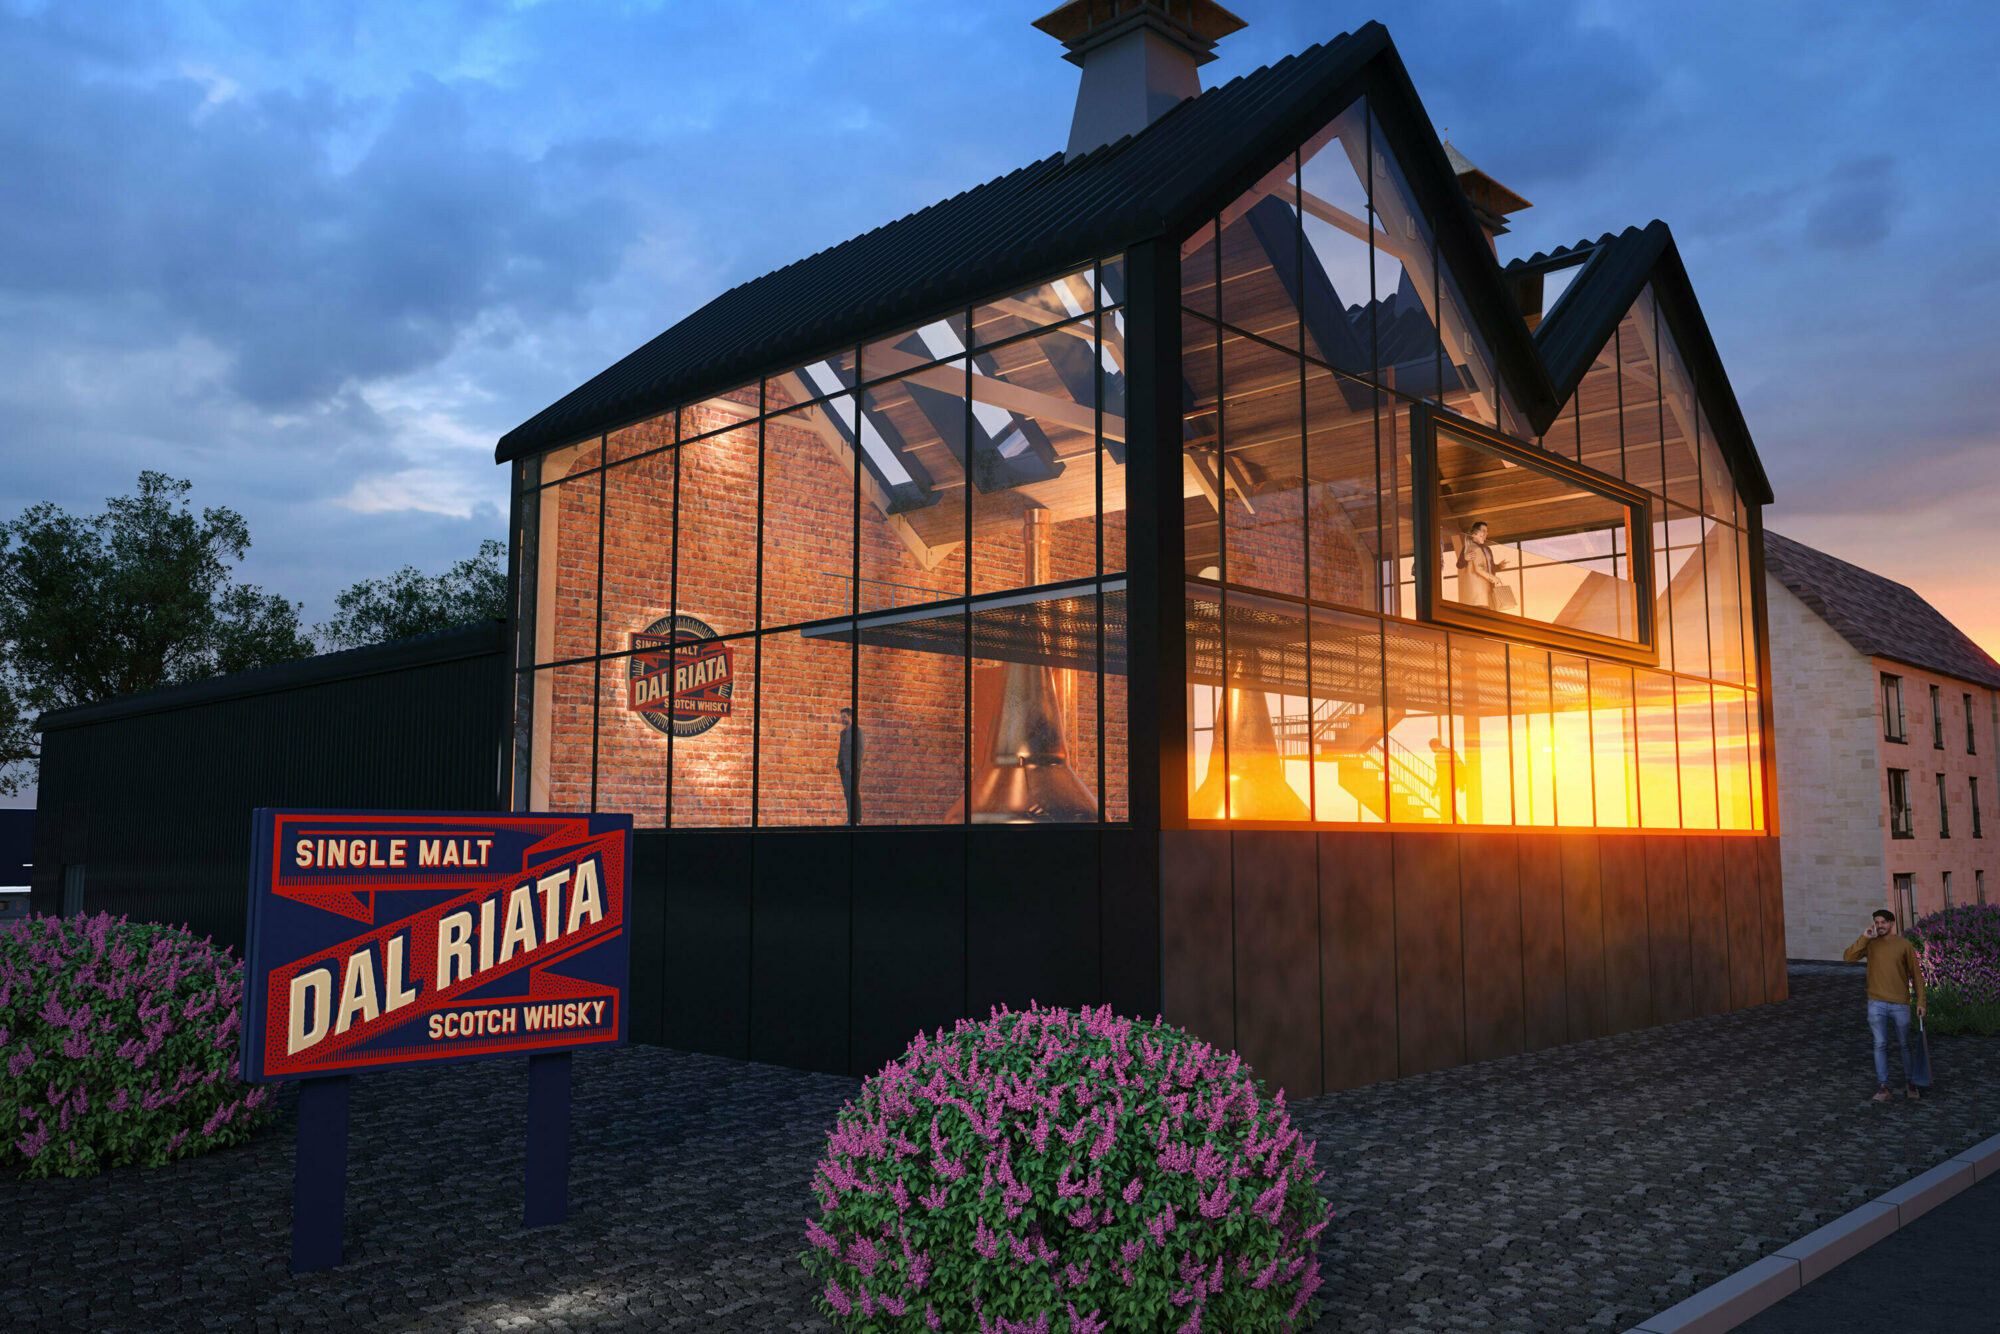 (The new Dál Riata distillery) Dál Riata distillery is part of a creeping revival for the once-mighty Campbeltown region